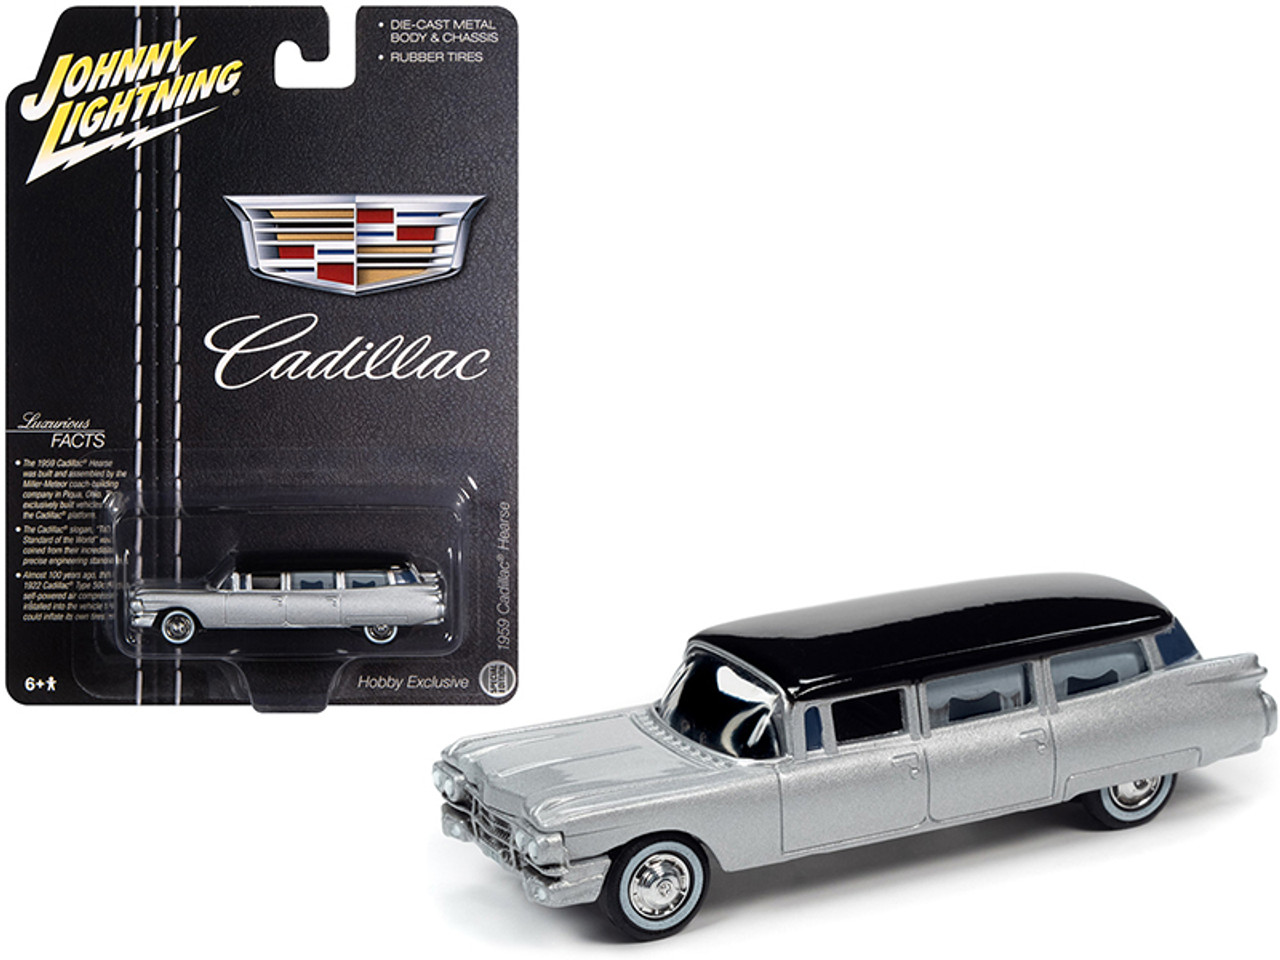 1959 Cadillac Hearse Silver with Black Top "Special Edition" 1/64 Diecast Model Car by Johnny Lightning